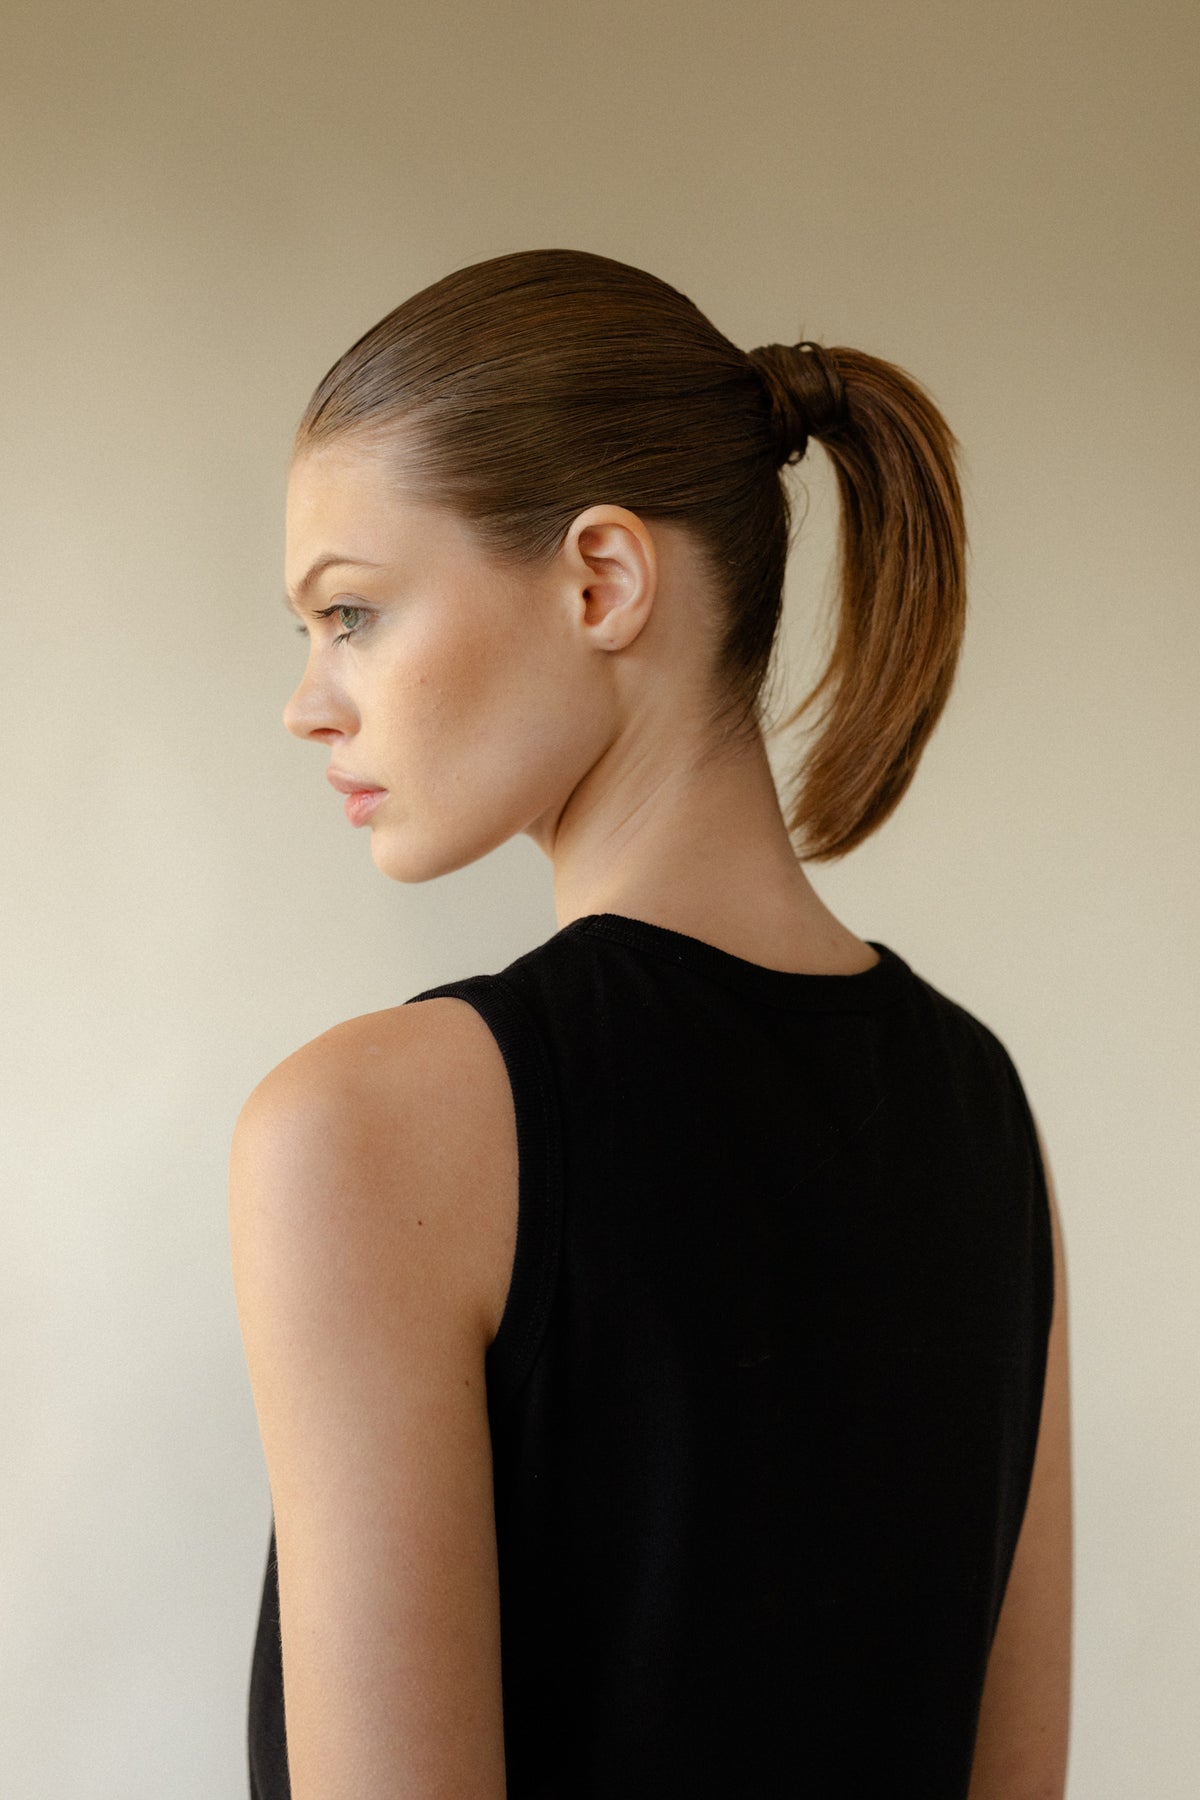 
            Shot of back of female with hair in ponytail looking to side showing side of face profile, wearing sleeveless t shirt in black